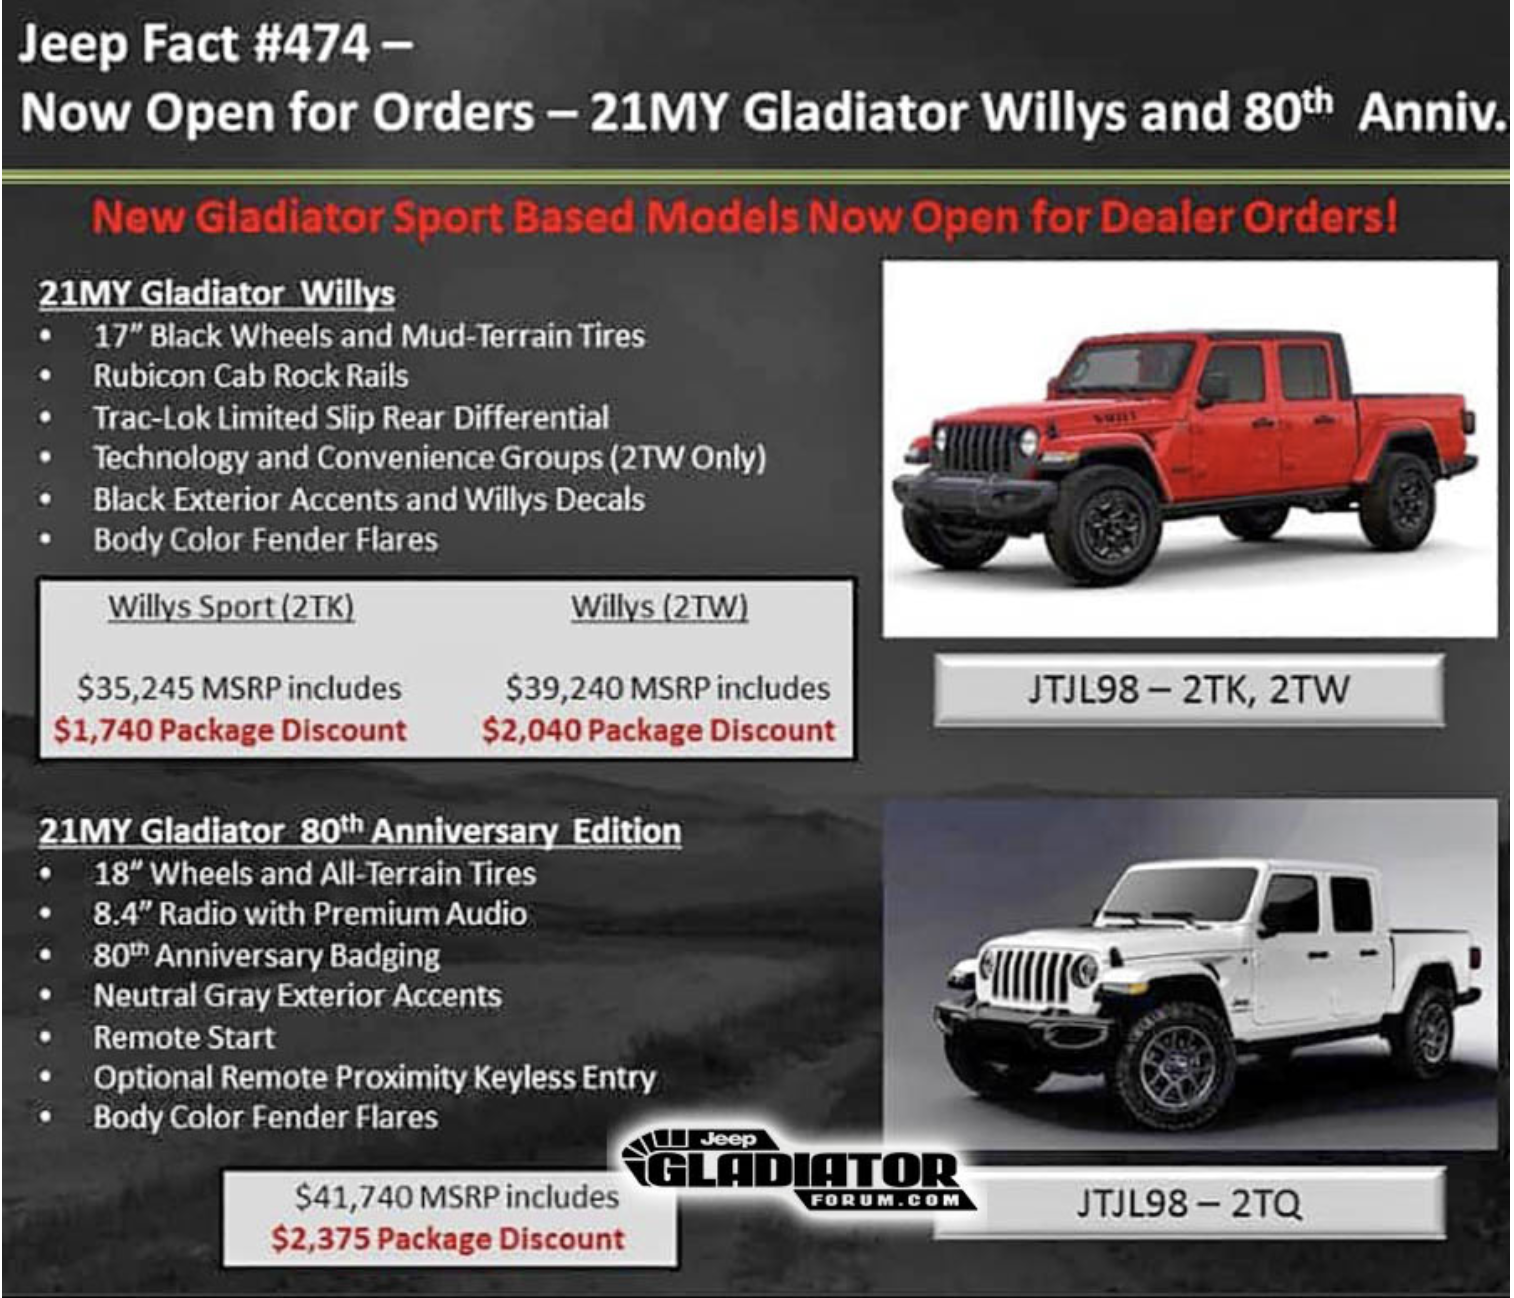 2021 Jeep Gladiator Details Leaked on Willys, Anniversary Models